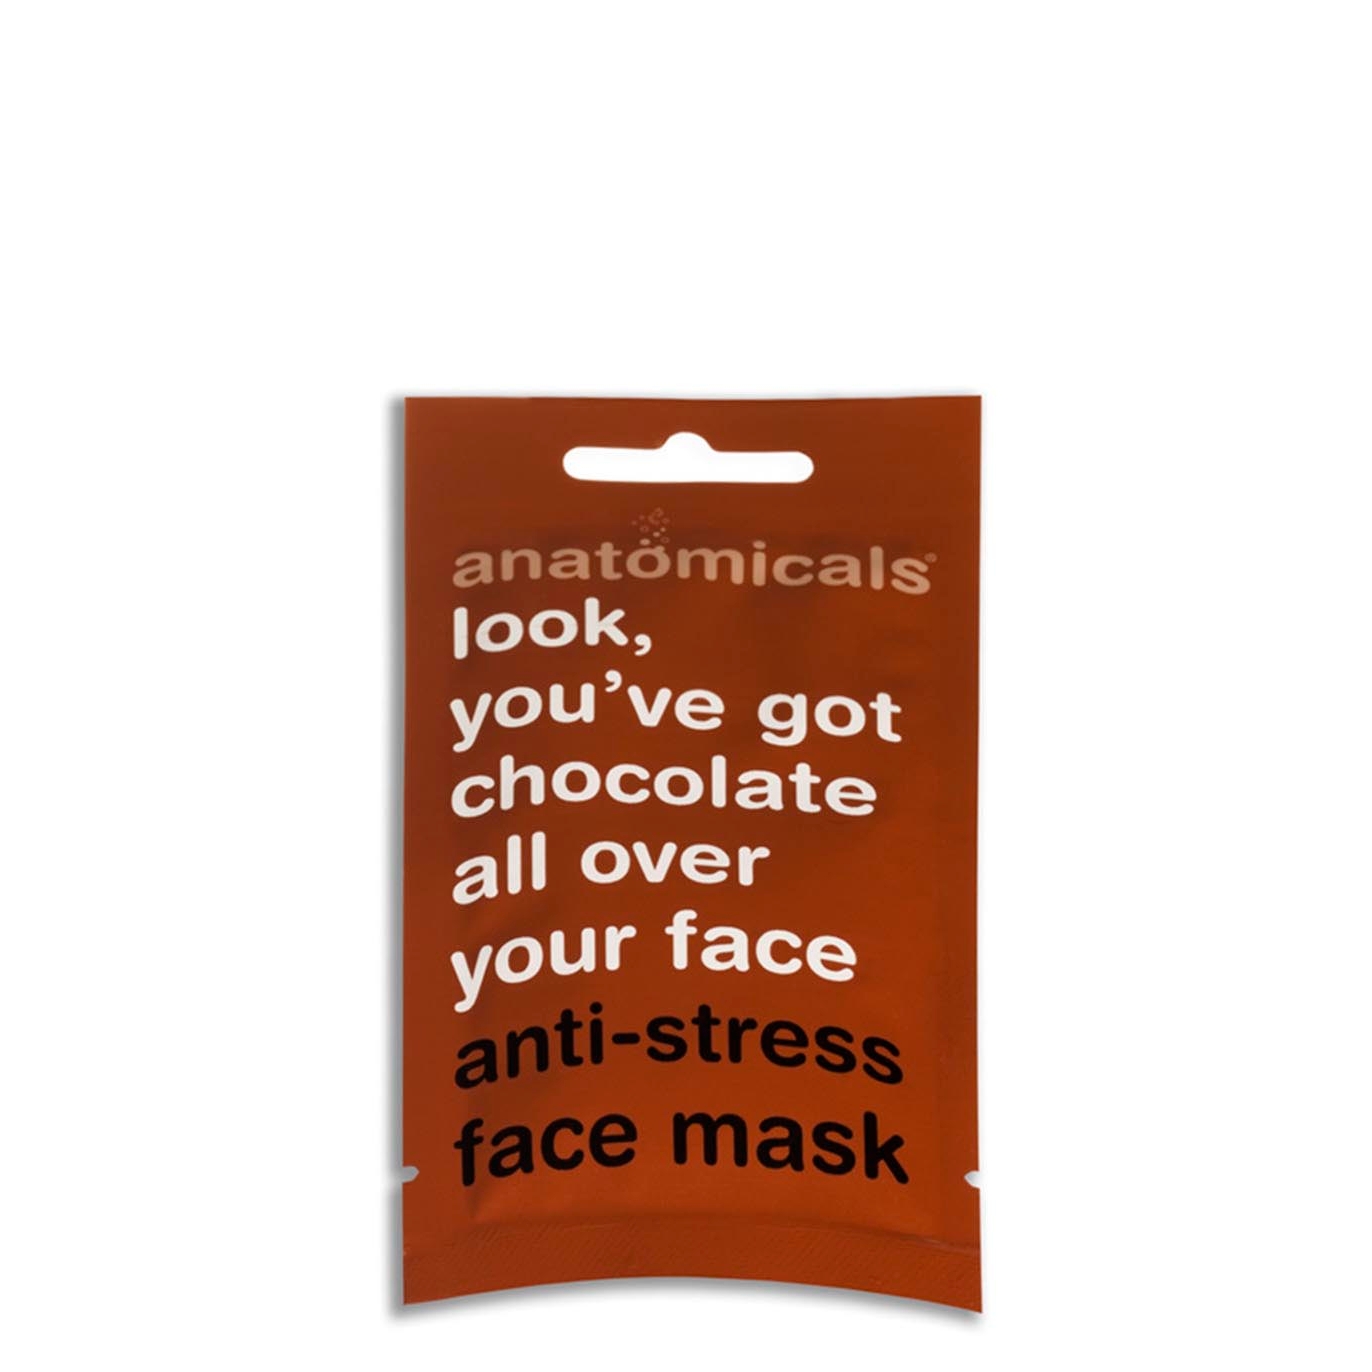 Anatomicals Look, You've Got Chocolate All Over Your Face Anti-Stress Mask